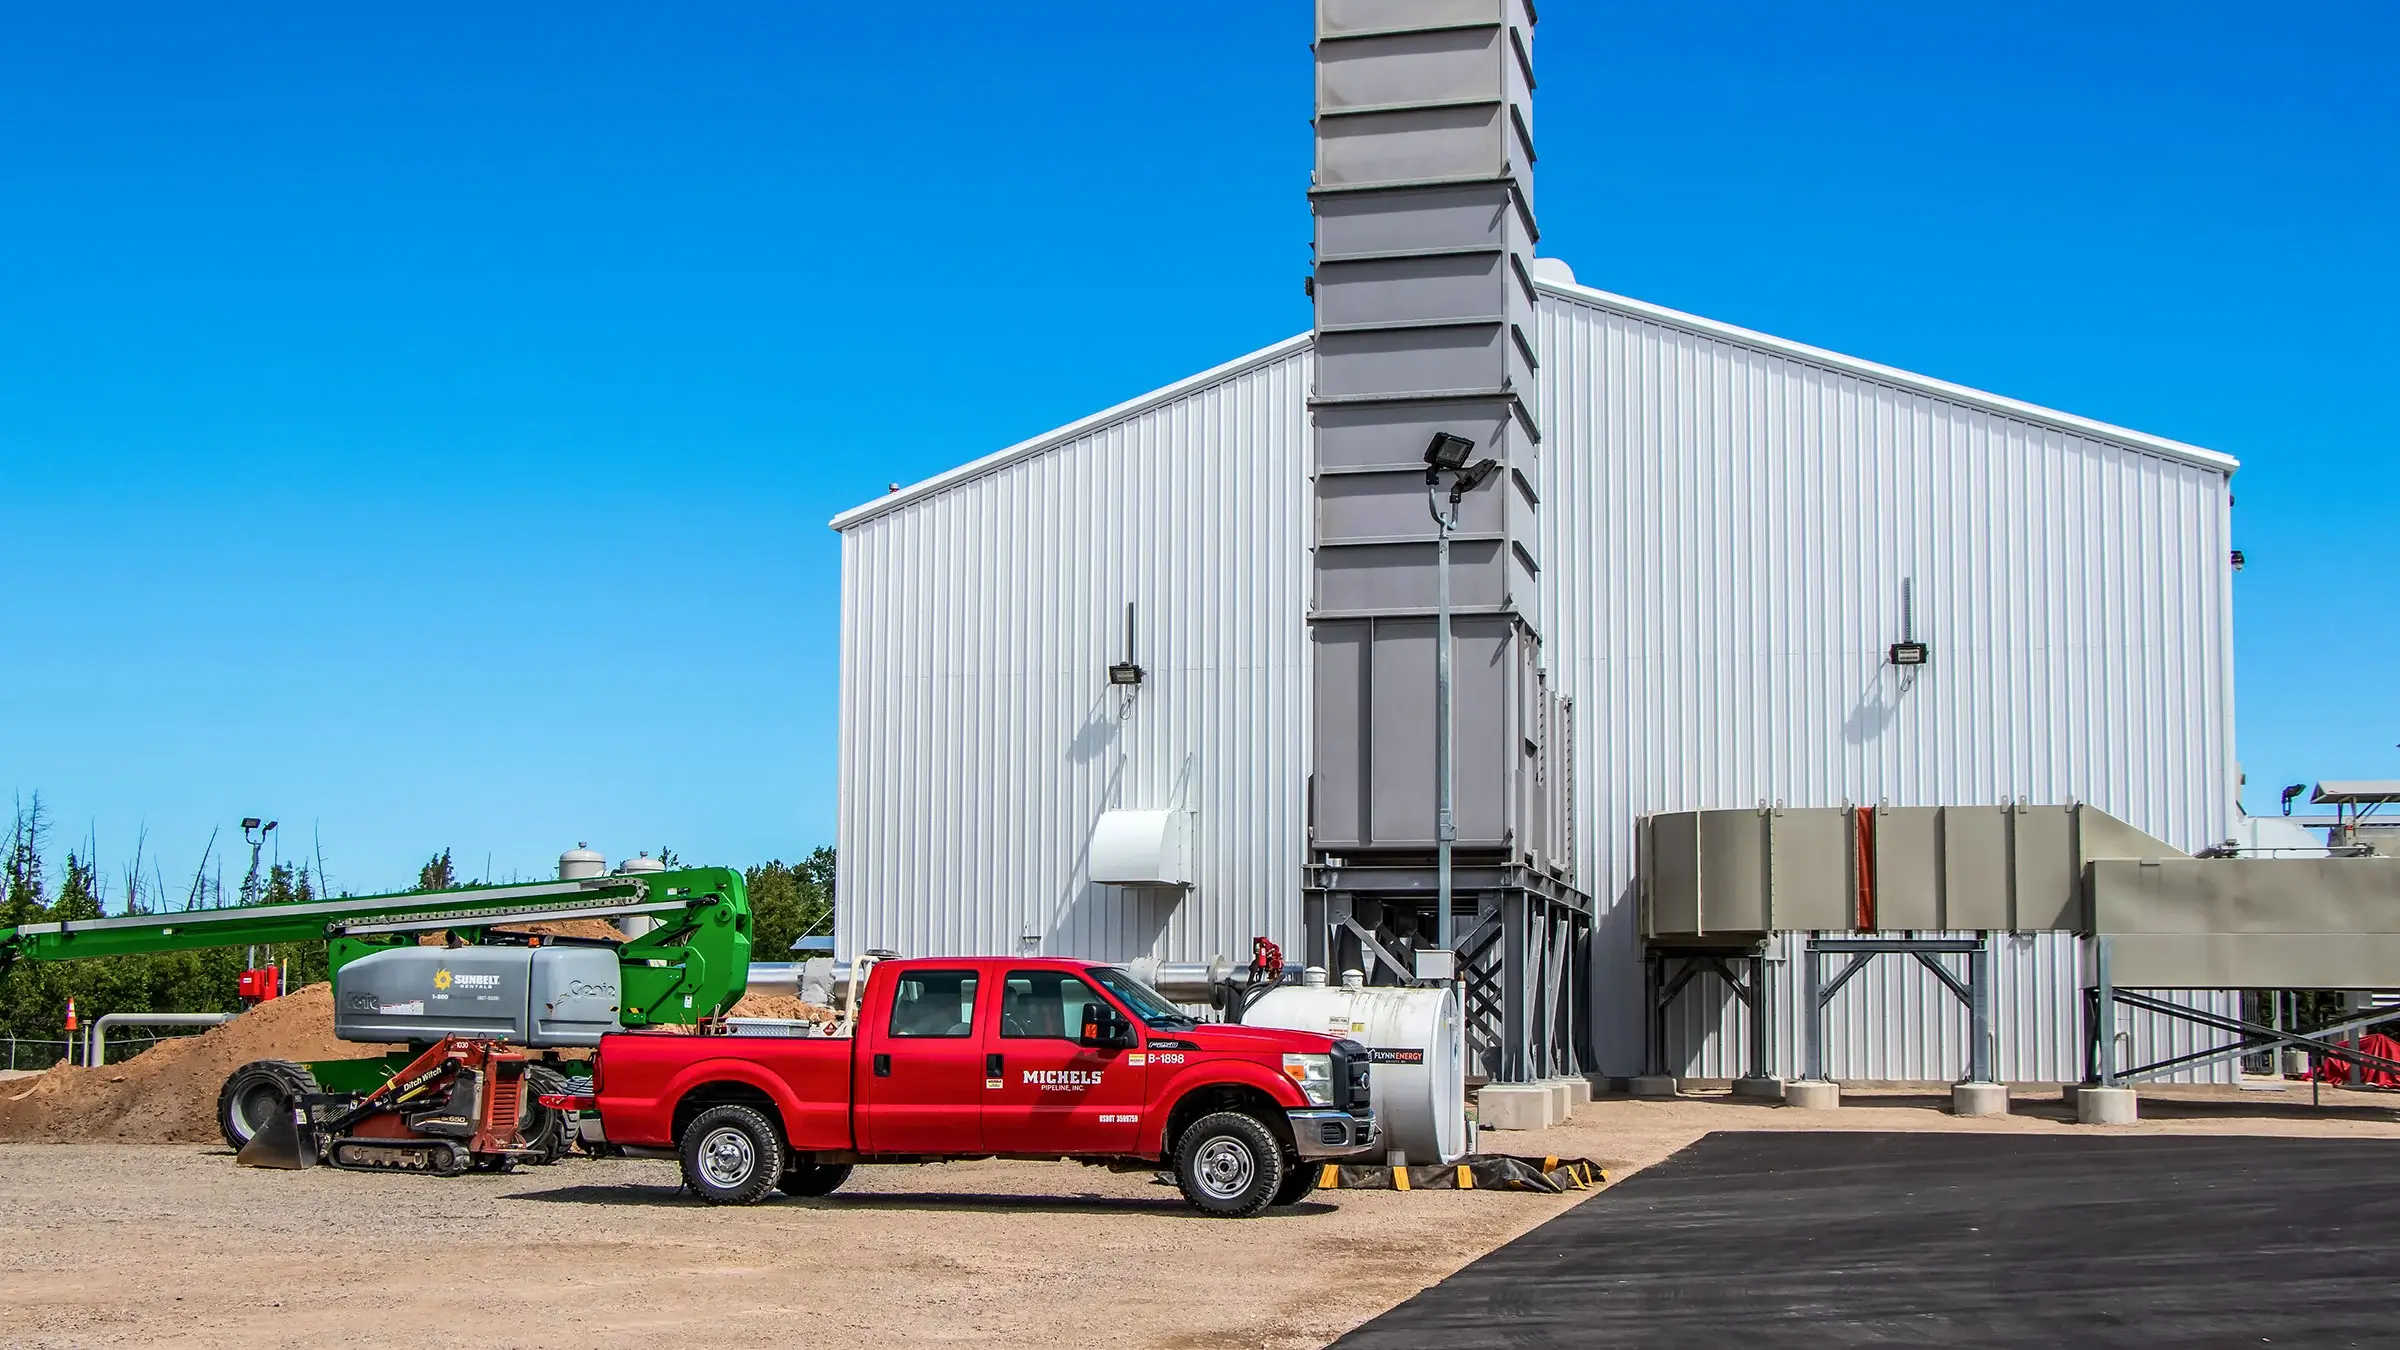 A red Michels truck sits outside of a compressor station facility.